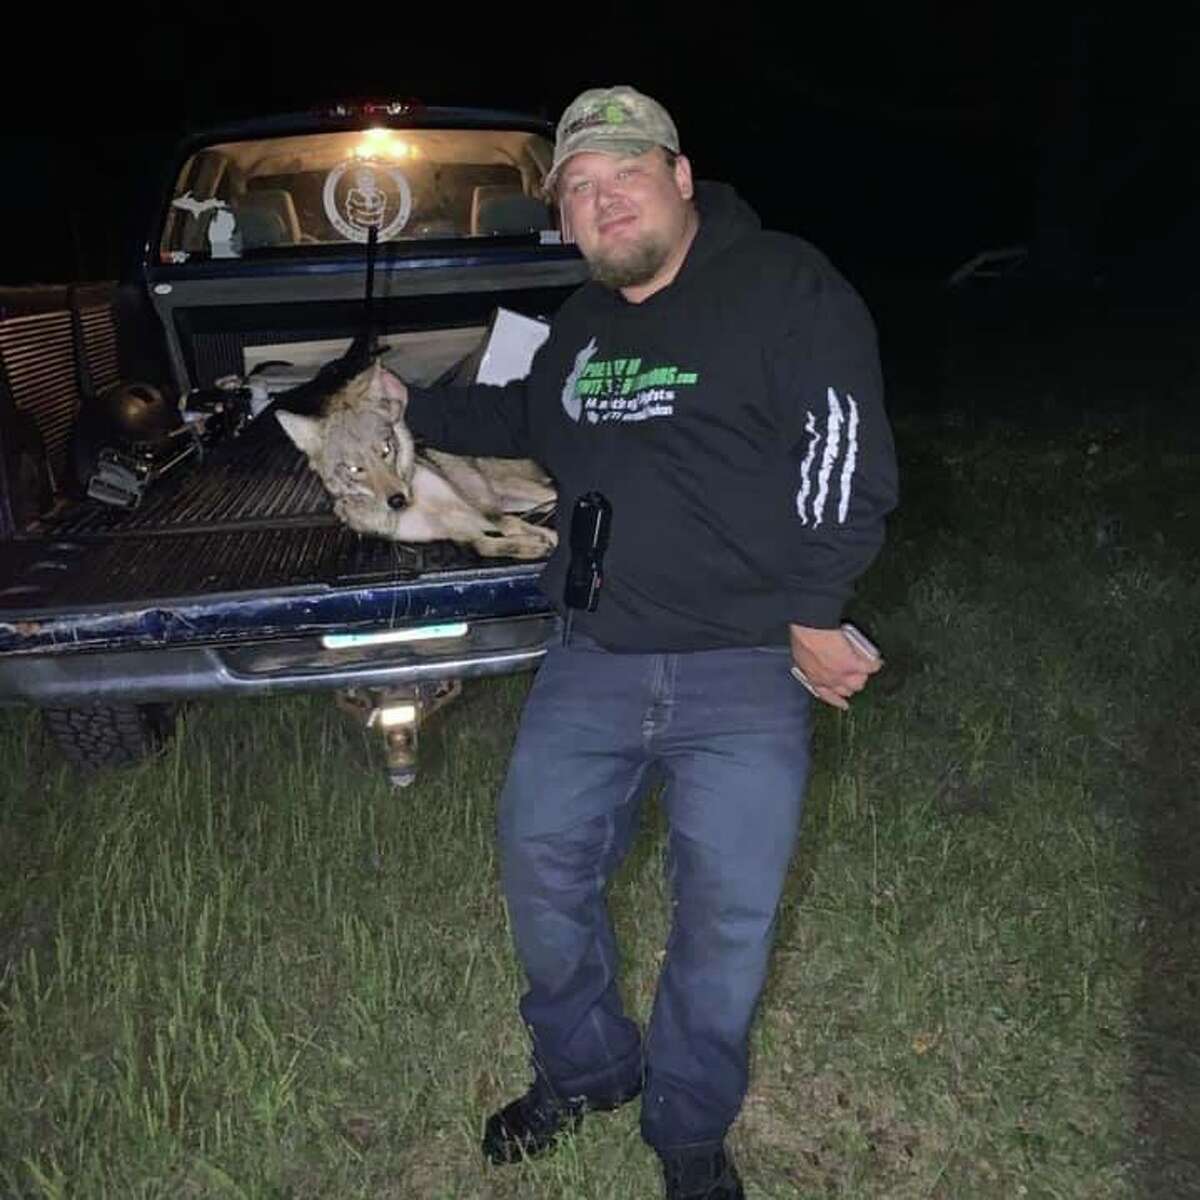 Shawn Allen is a predator hunter who hunts coyotes for local animals owners.